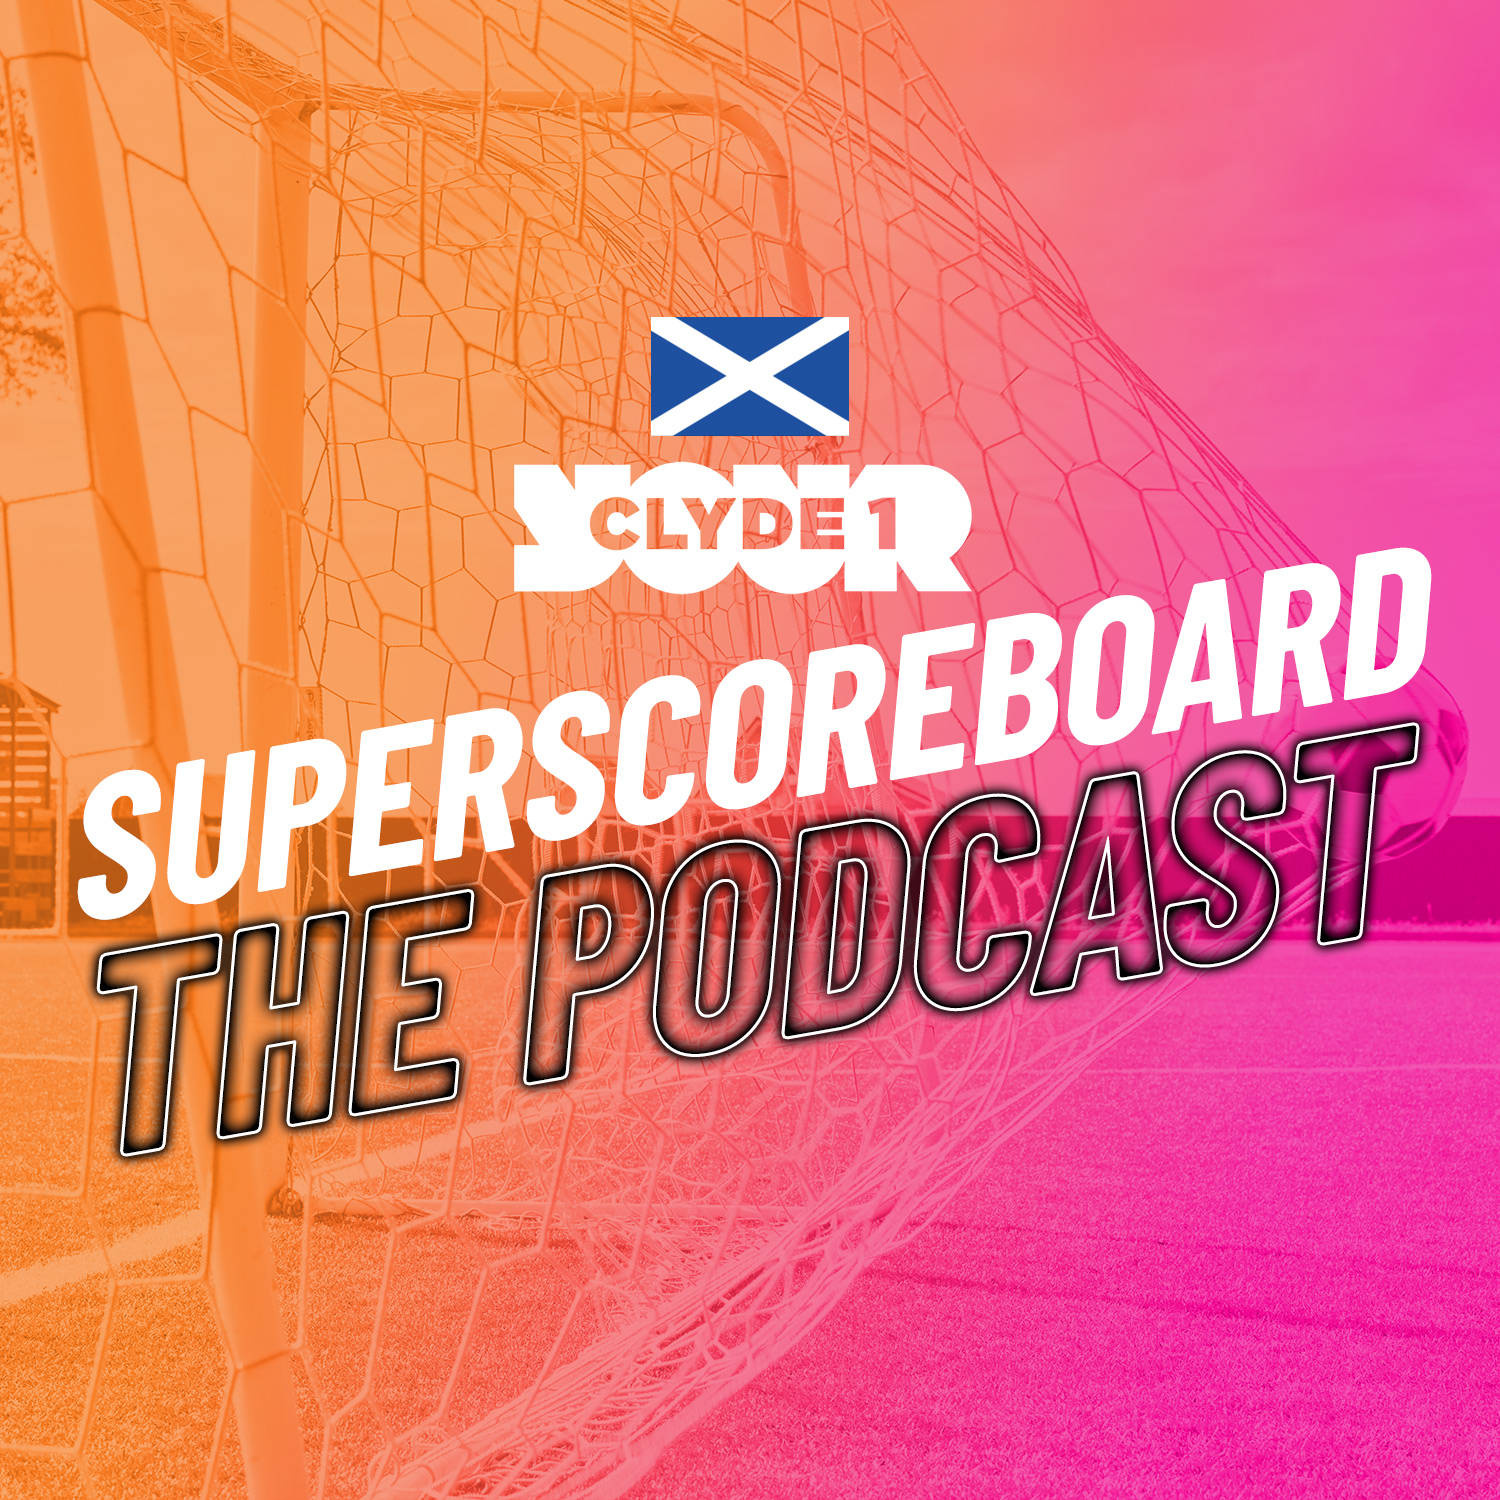 Sunday 28th April Clyde 1 Superscoreboard – Part 3